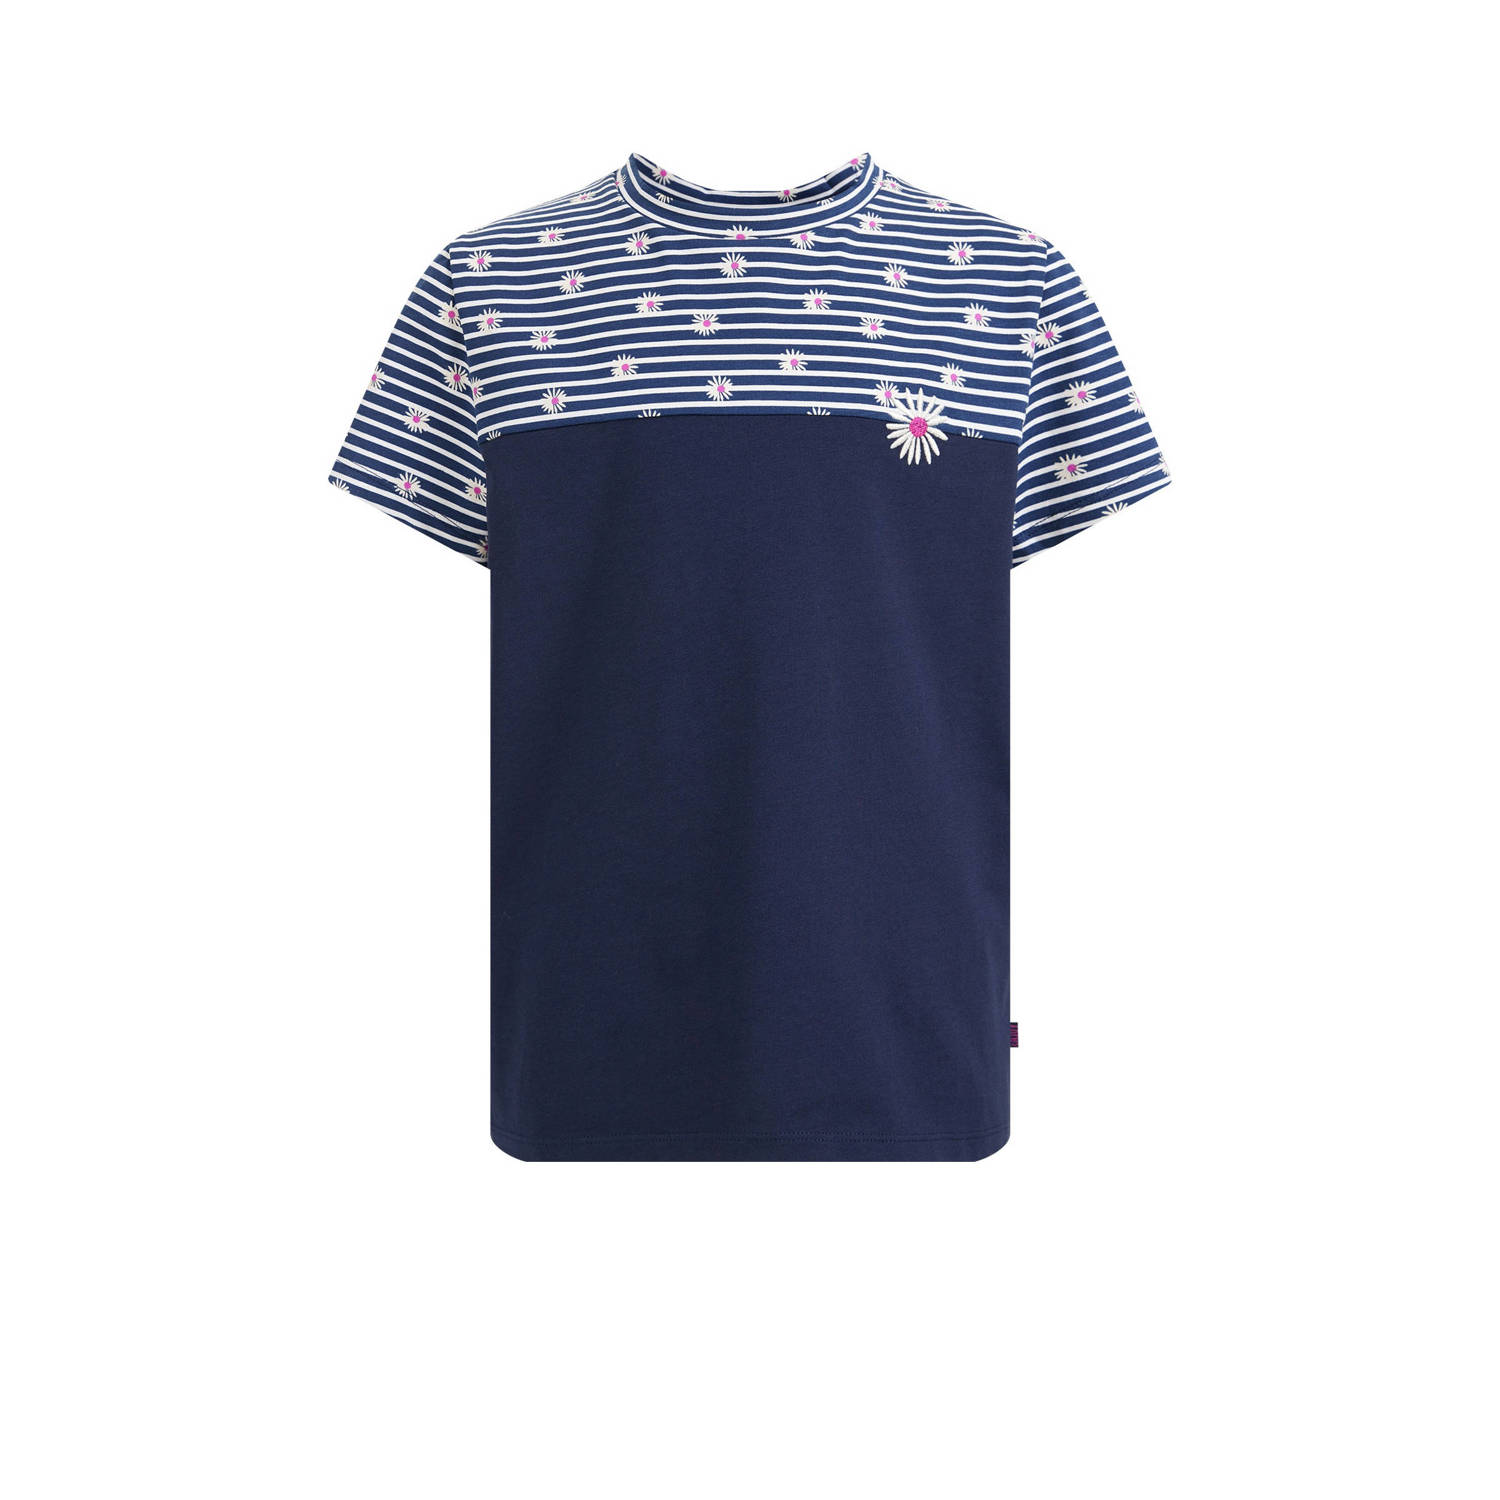 WE Fashion T-shirt met all over print donkerblauw